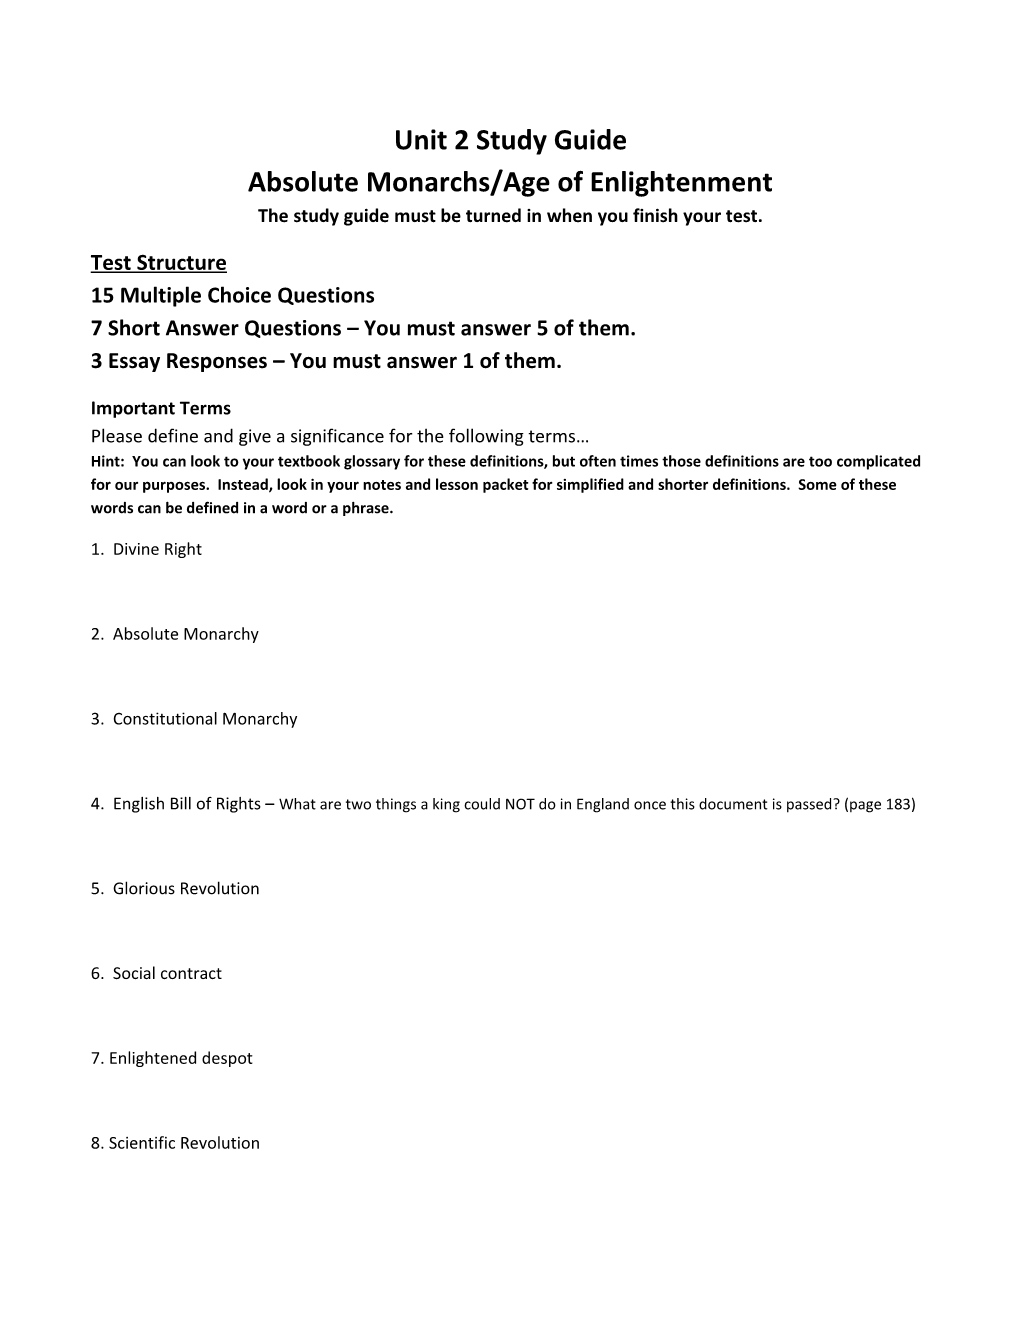 Unit 2 Study Guide Absolute Monarchs/Age of Enlightenment the Study Guide Must Be Turned